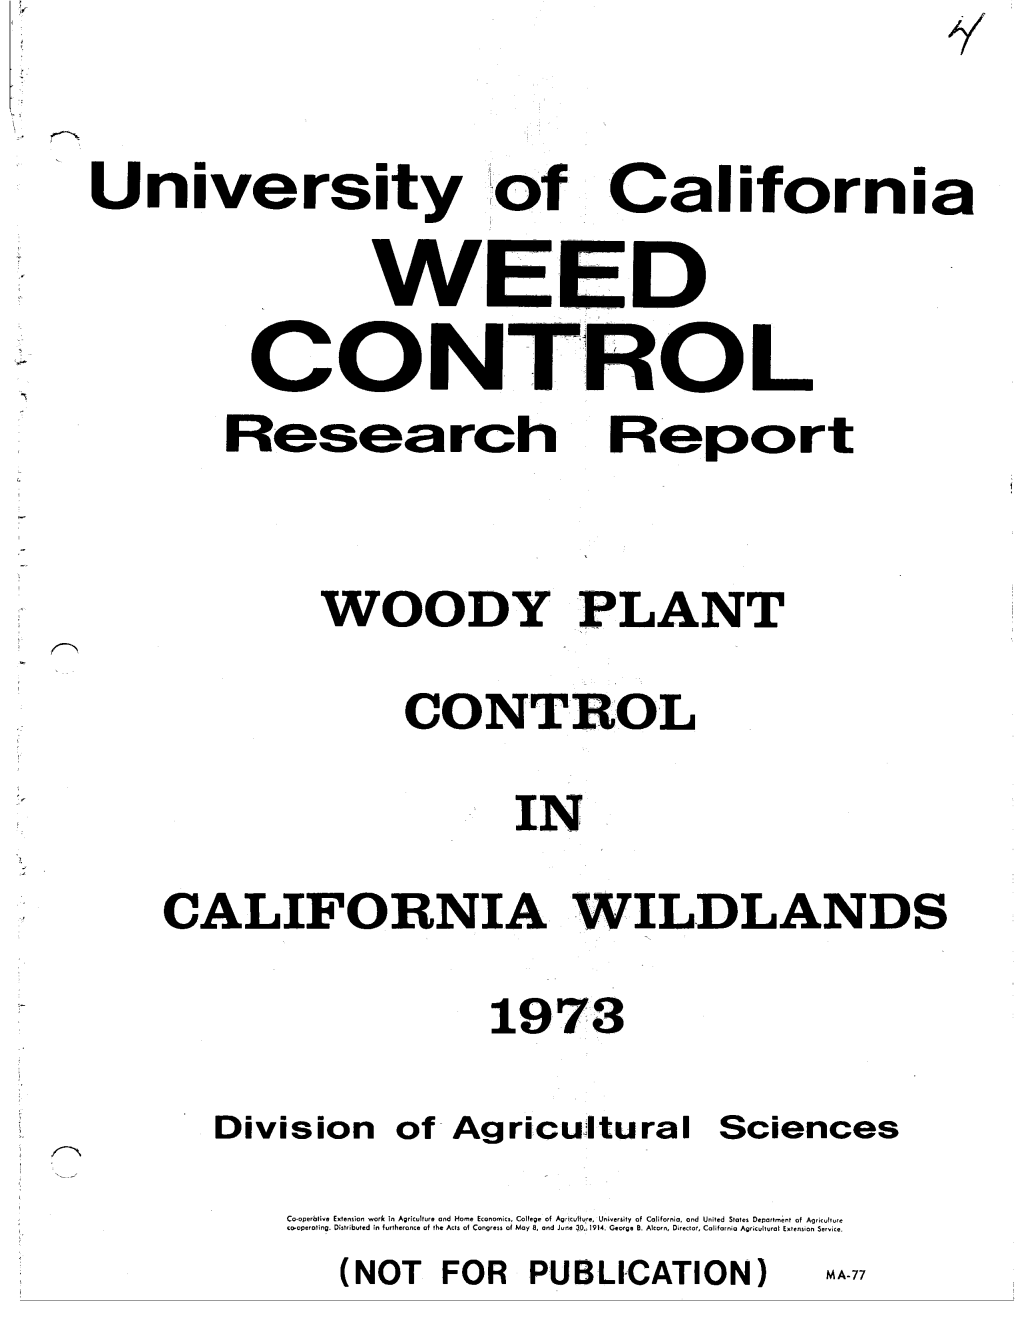 WEED CONTROL Research Report